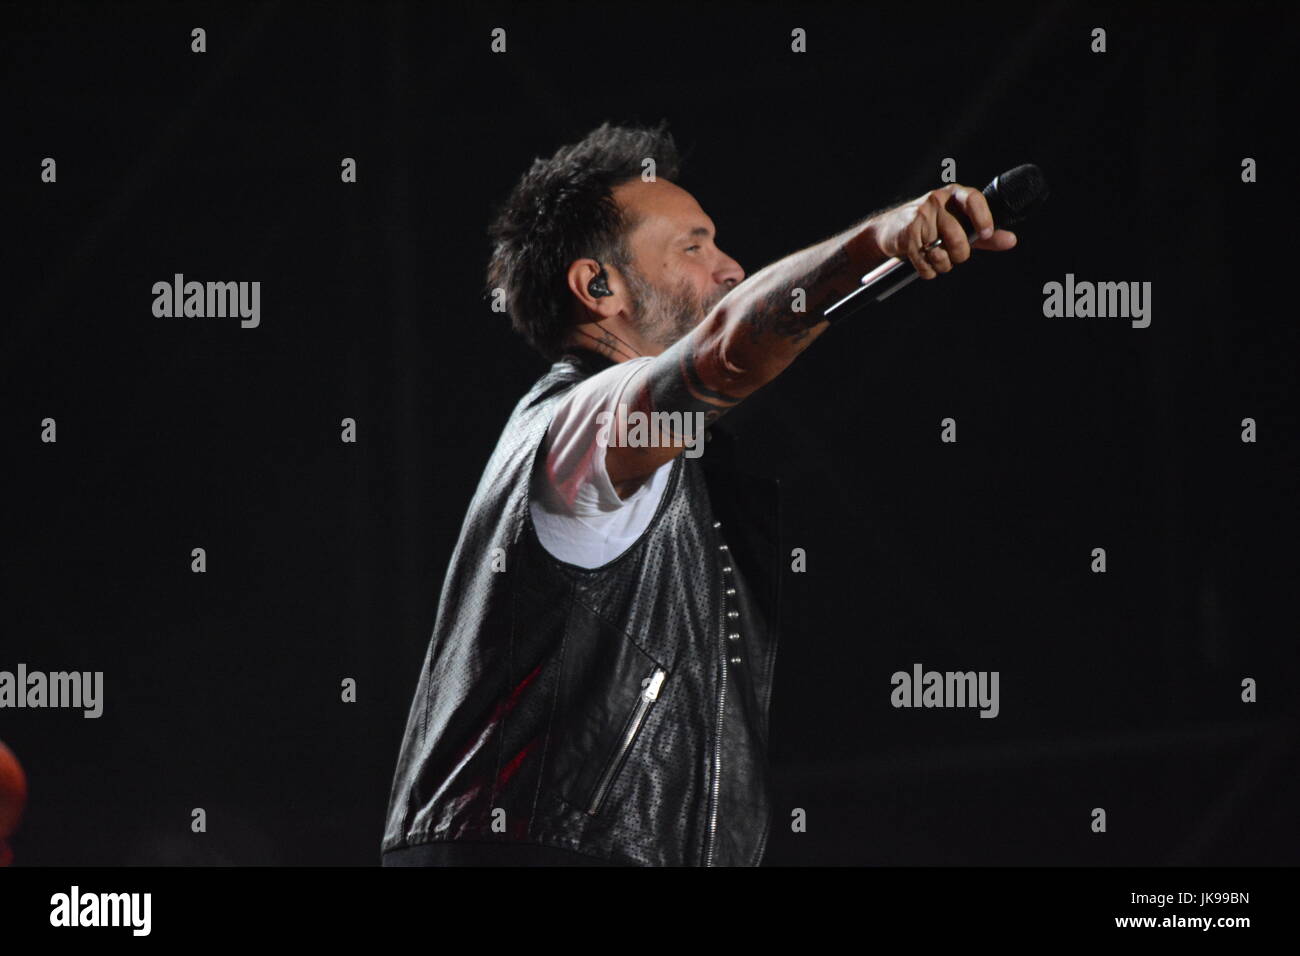 Naples, Italy. 20th July, 2017. Filippo Neviani also known as 'Nek' italian singer and songwriter performs on the stage of the ETES Arena Flegrea Stock Photo